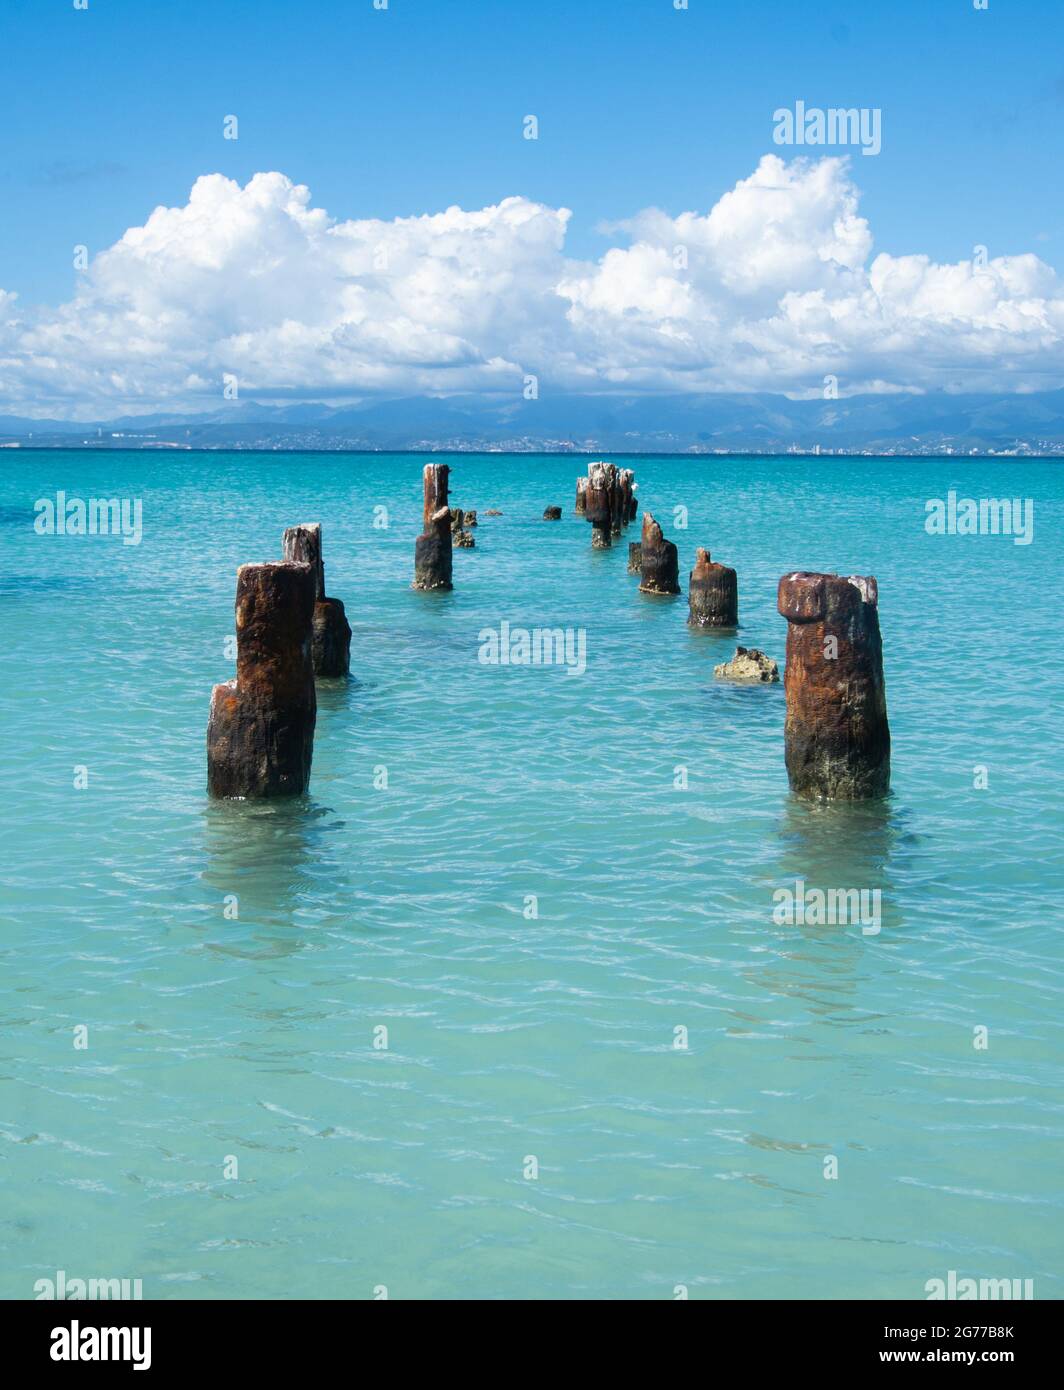 Old dock pilings in the turquoise water of the Caribbean Sea off the Isla de Cajos de Muertos, Puerto Rico, USA. Copy space. Stock Photo